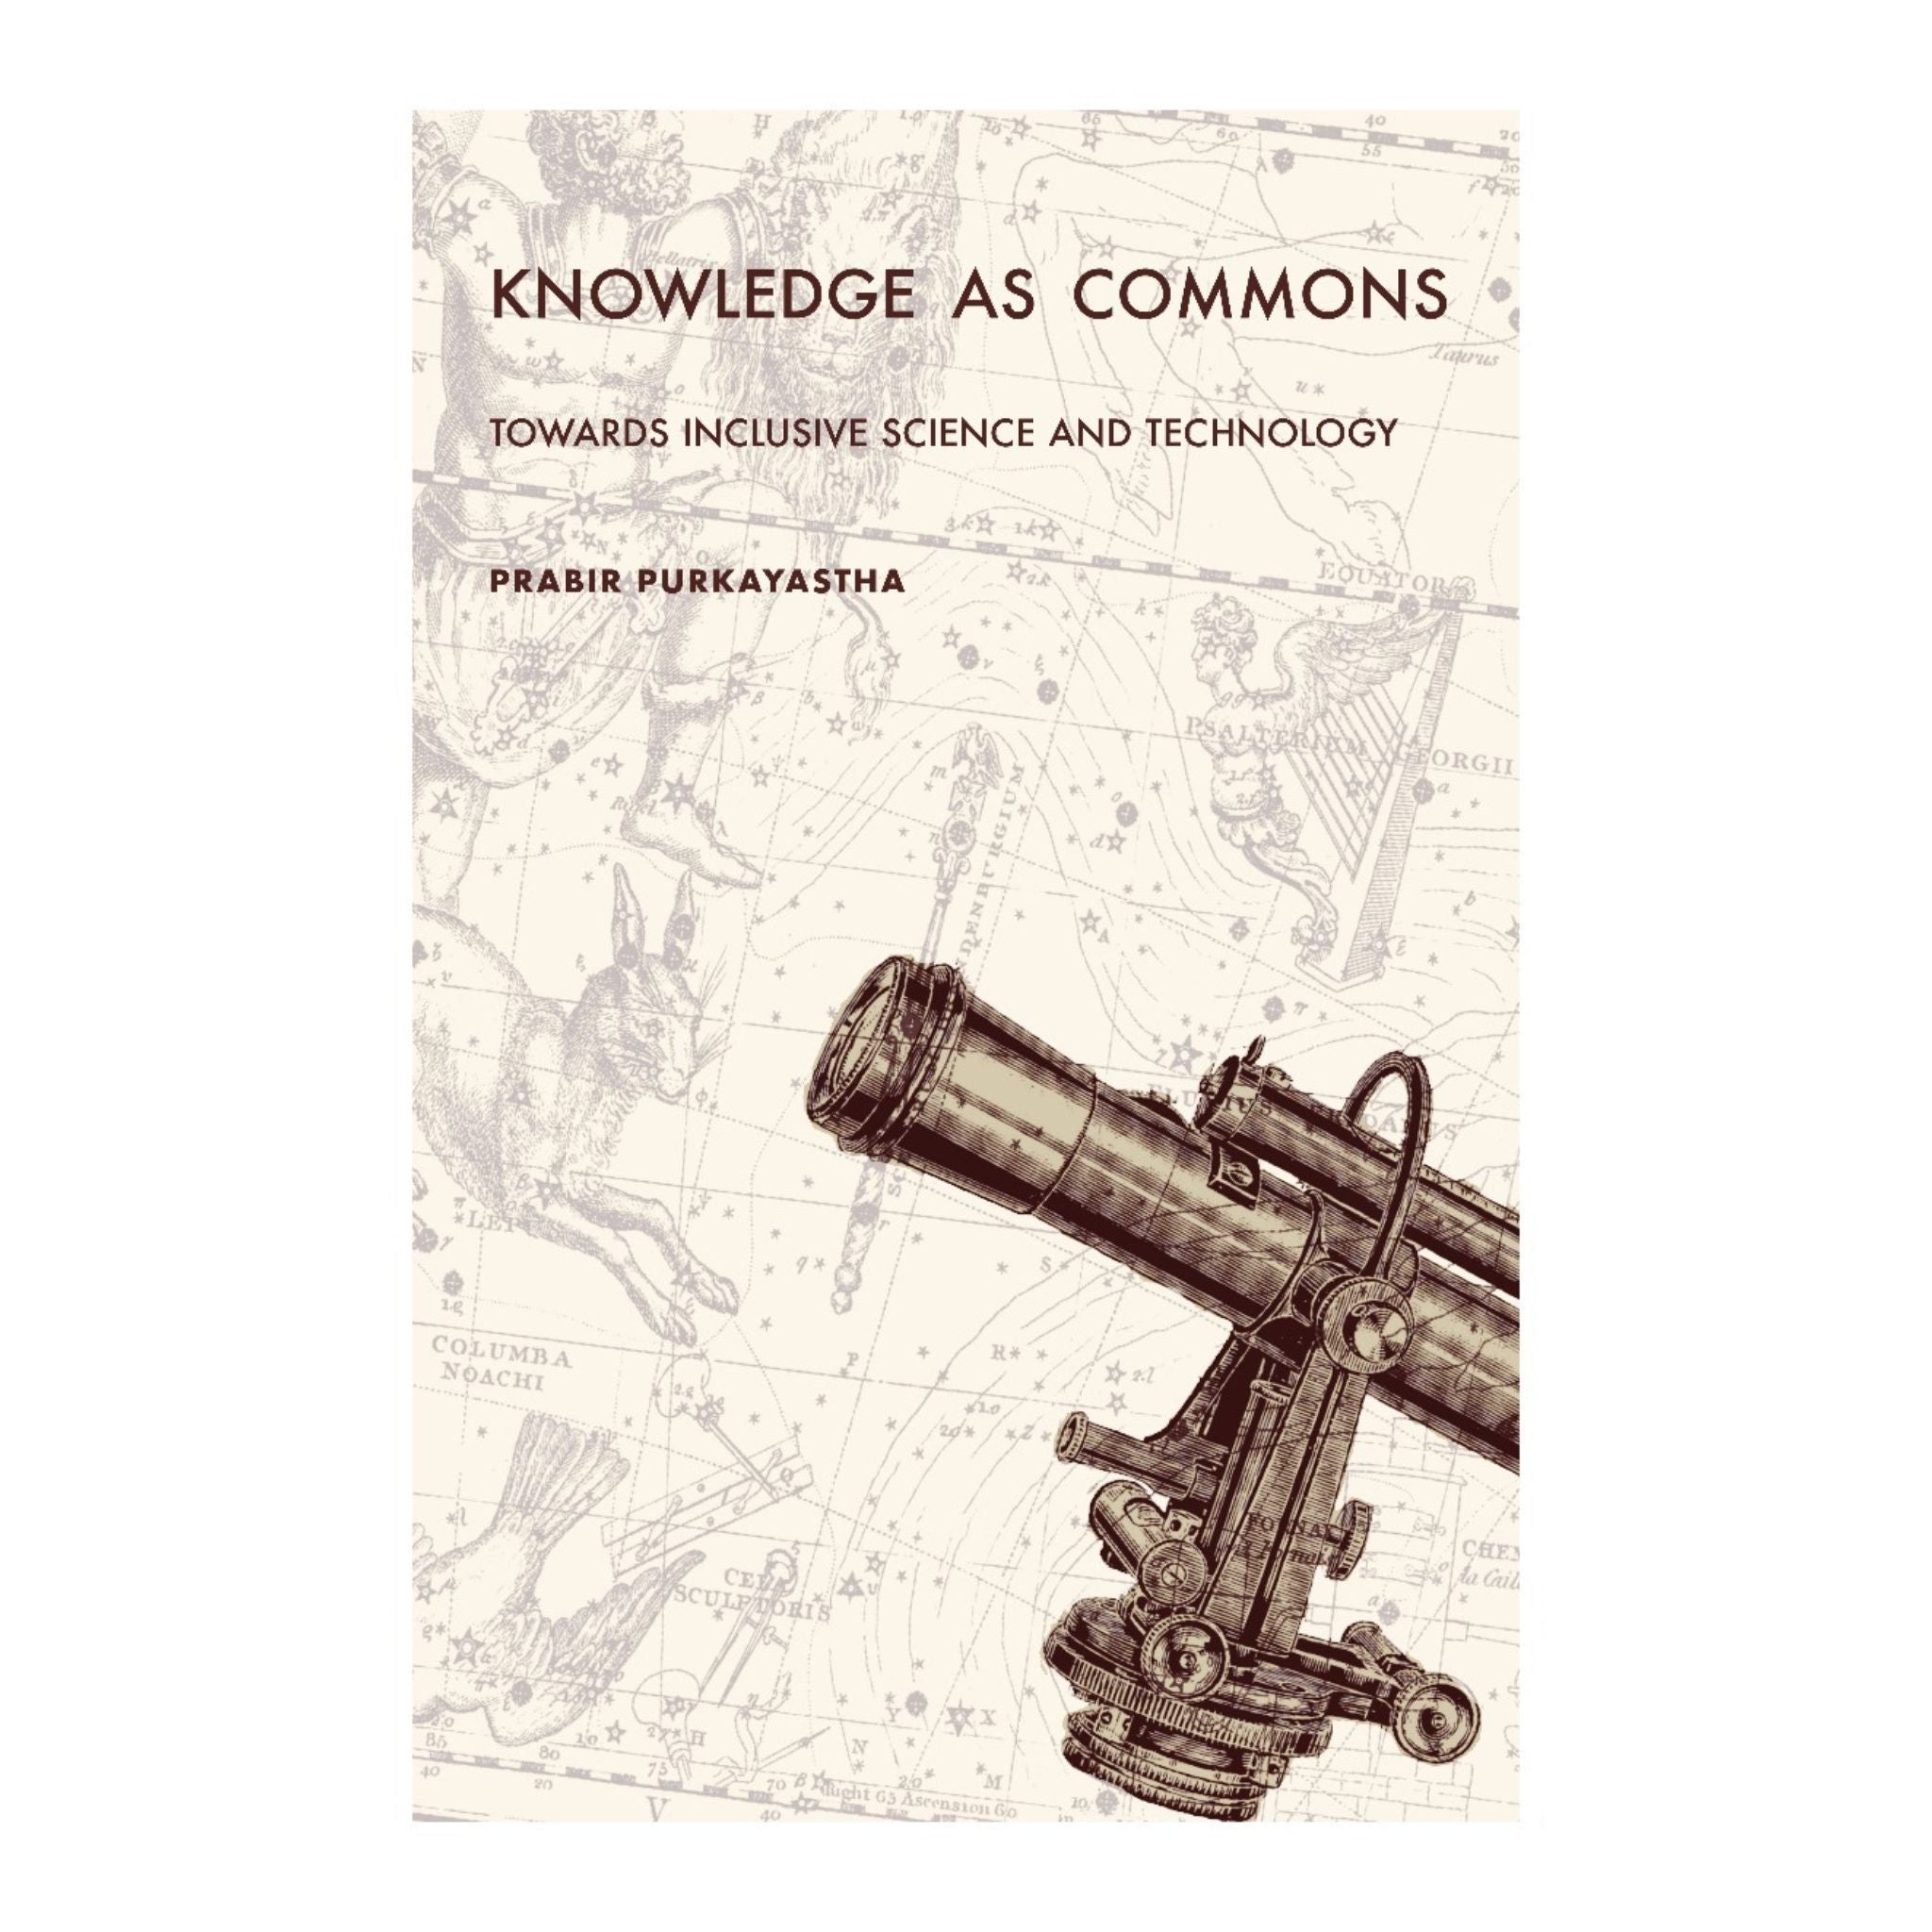 Knowledge as Commons: Towards Inclusive Science and Technology